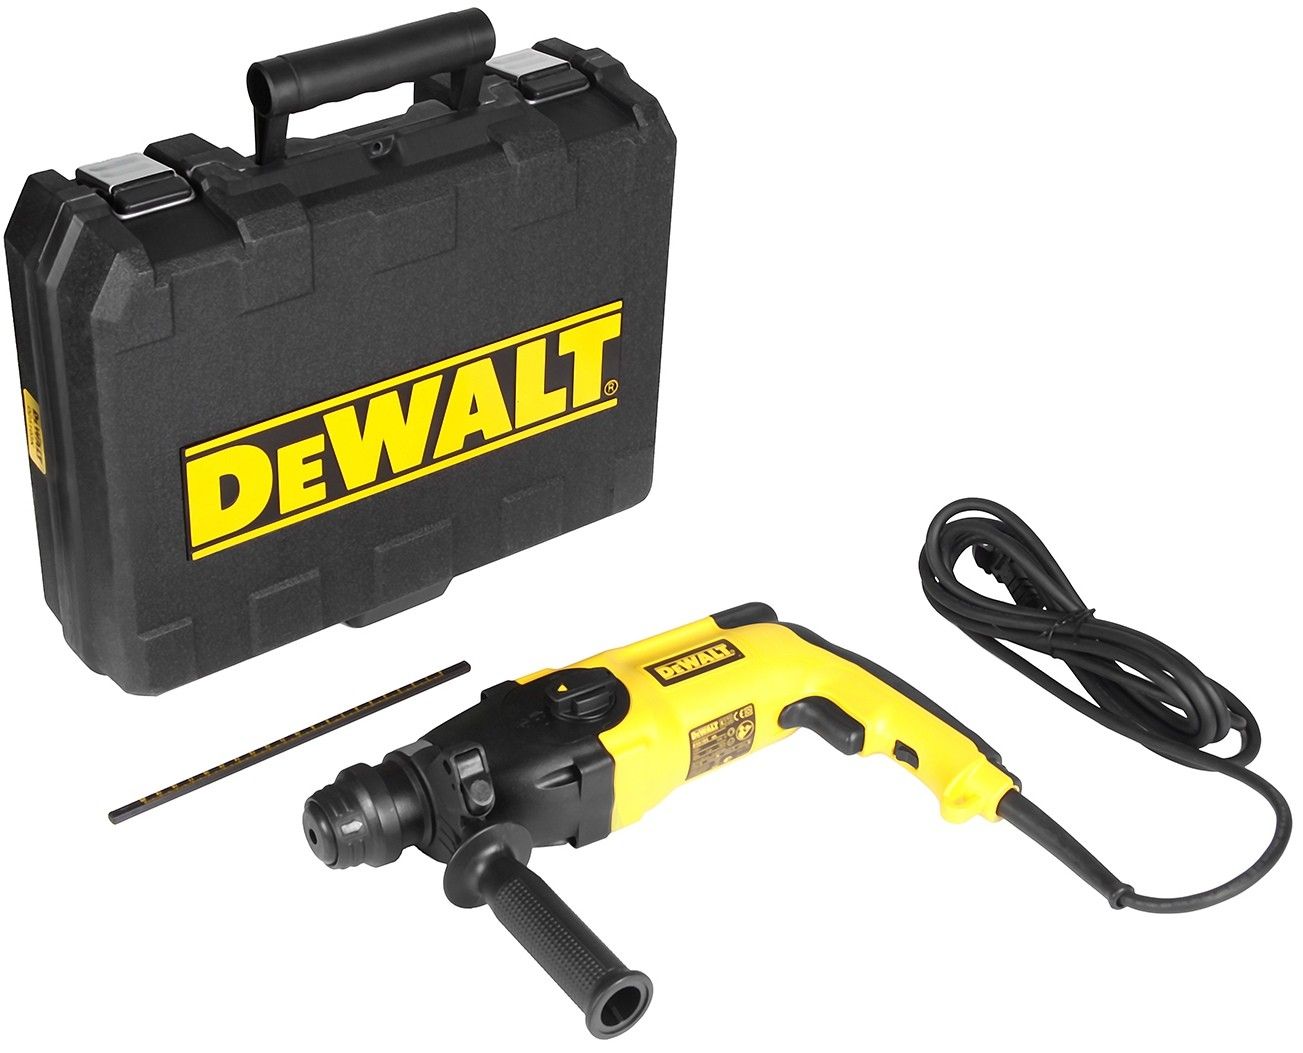 Review of the best DeWALT rotary hammers in 2022